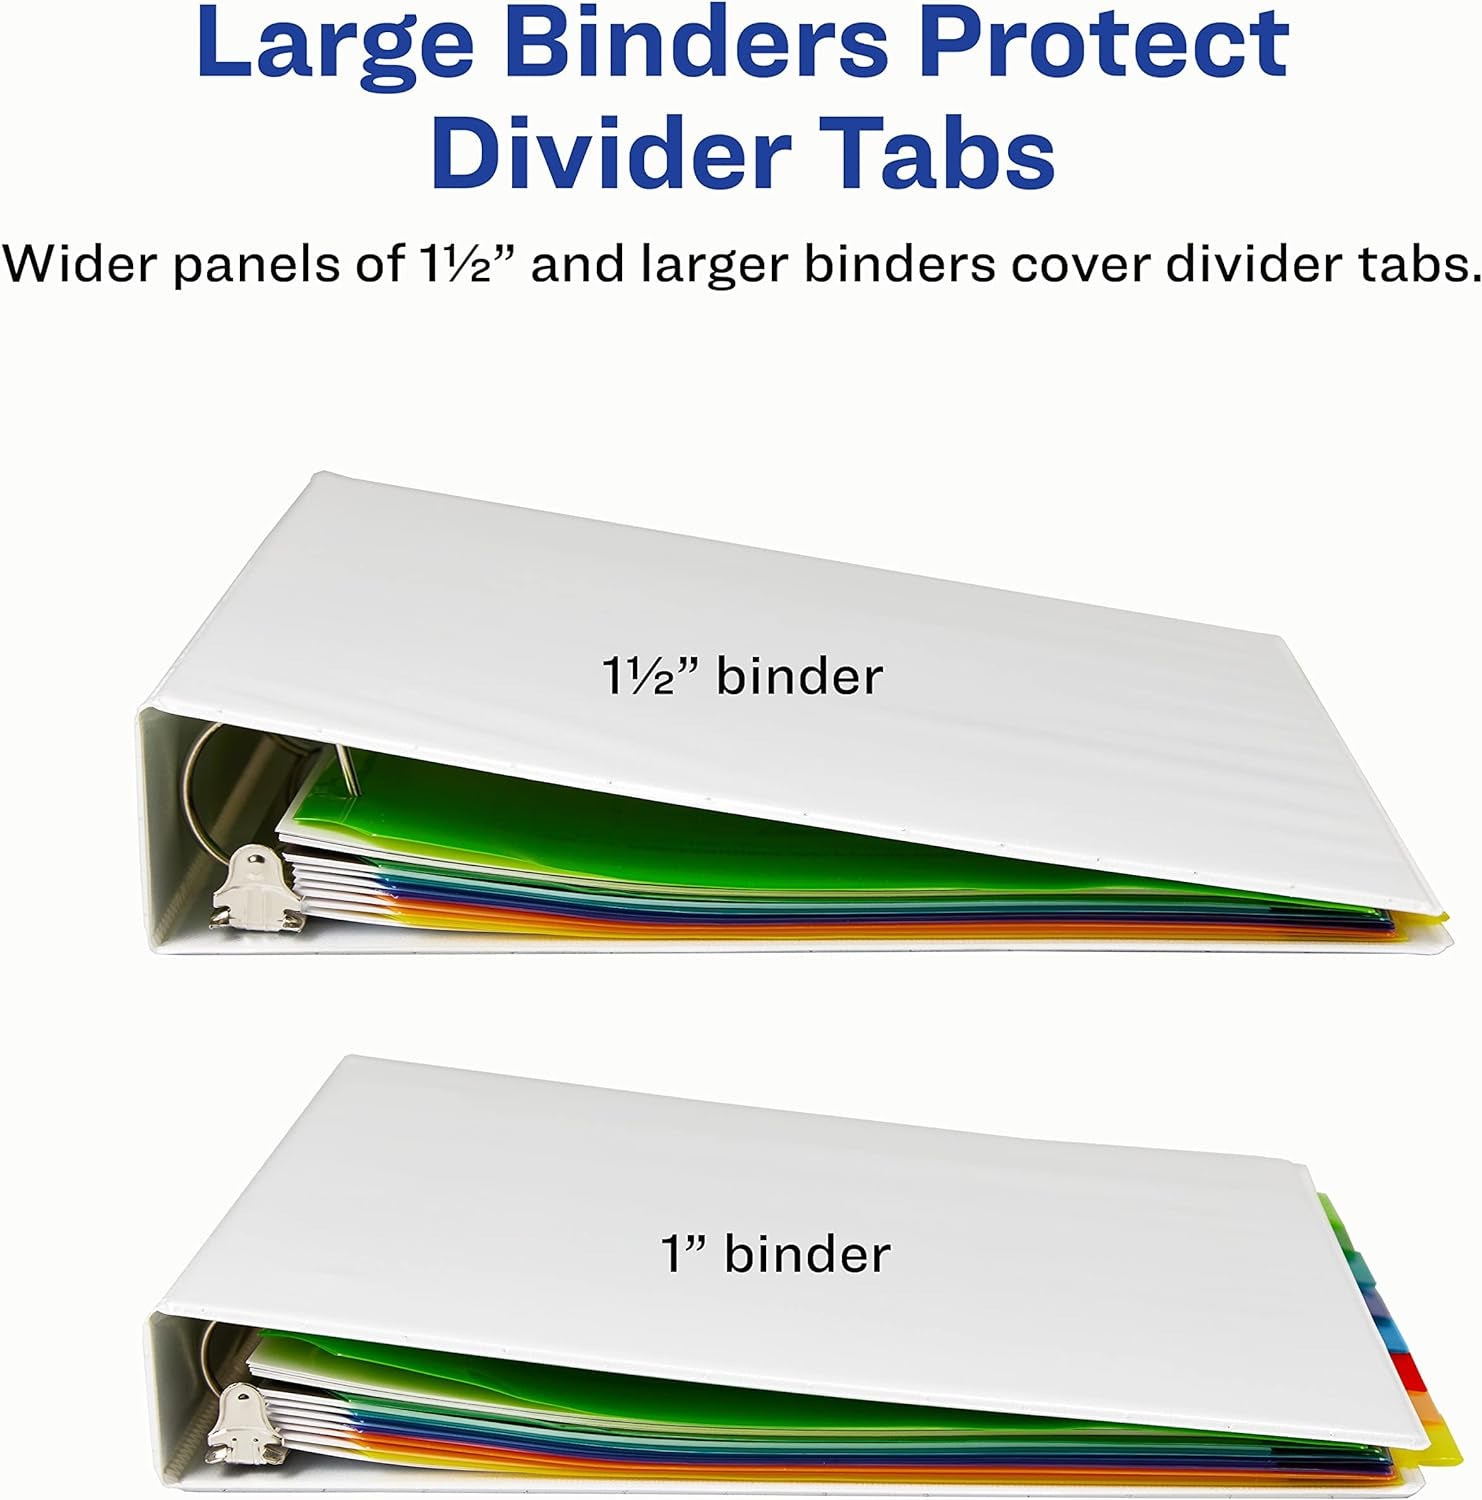 Dividers for 3 Ring Binders, 8 Tab Binder Dividers, Plastic Binder Dividers with Pockets, Insertable Big Tabs, Multicolor, Works with Sheet Protectors, 1 Set (11903)